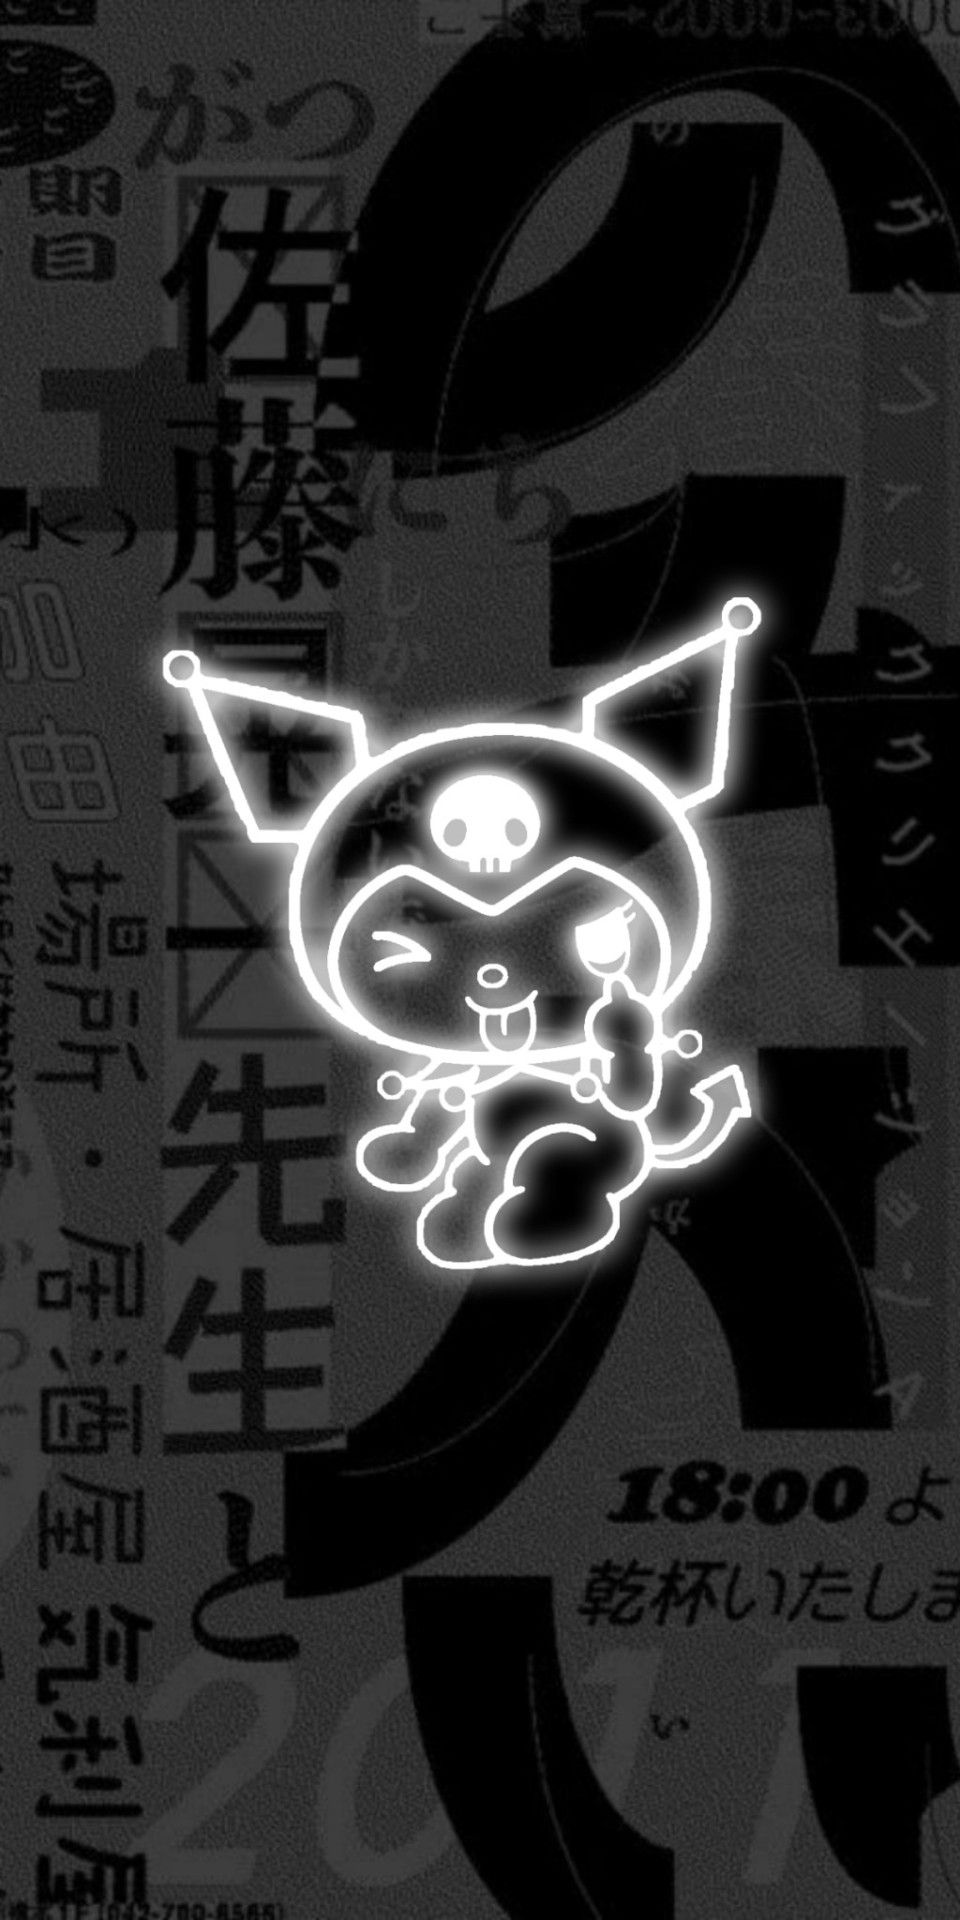 IPhone wallpaper of Sanrio character Kuromi in black and white with Japanese text in the background - Gothic